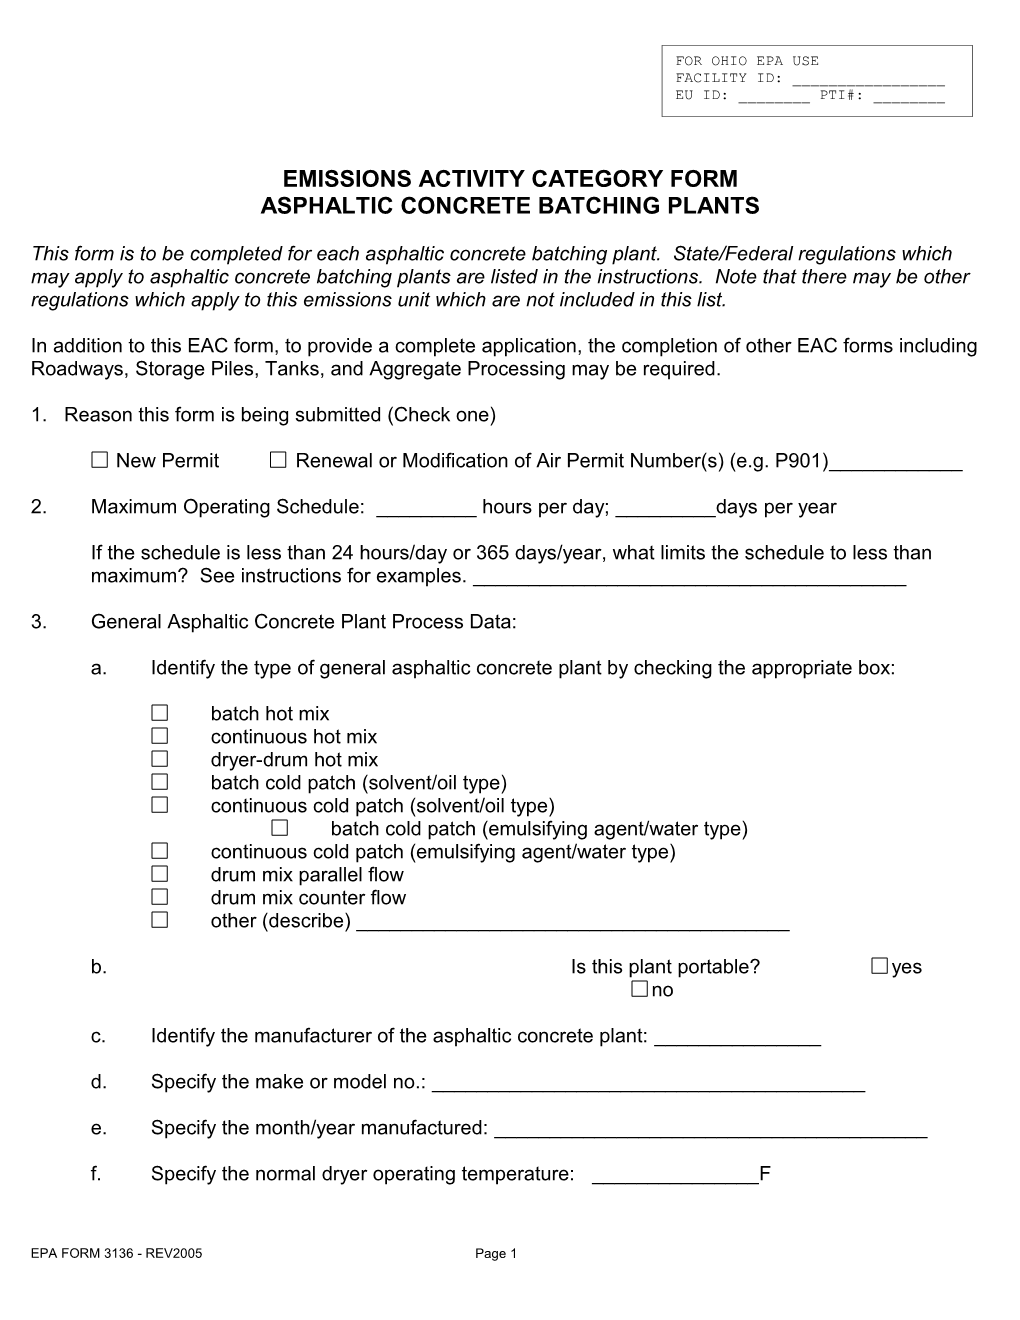 Emissions Activity Category Form s4